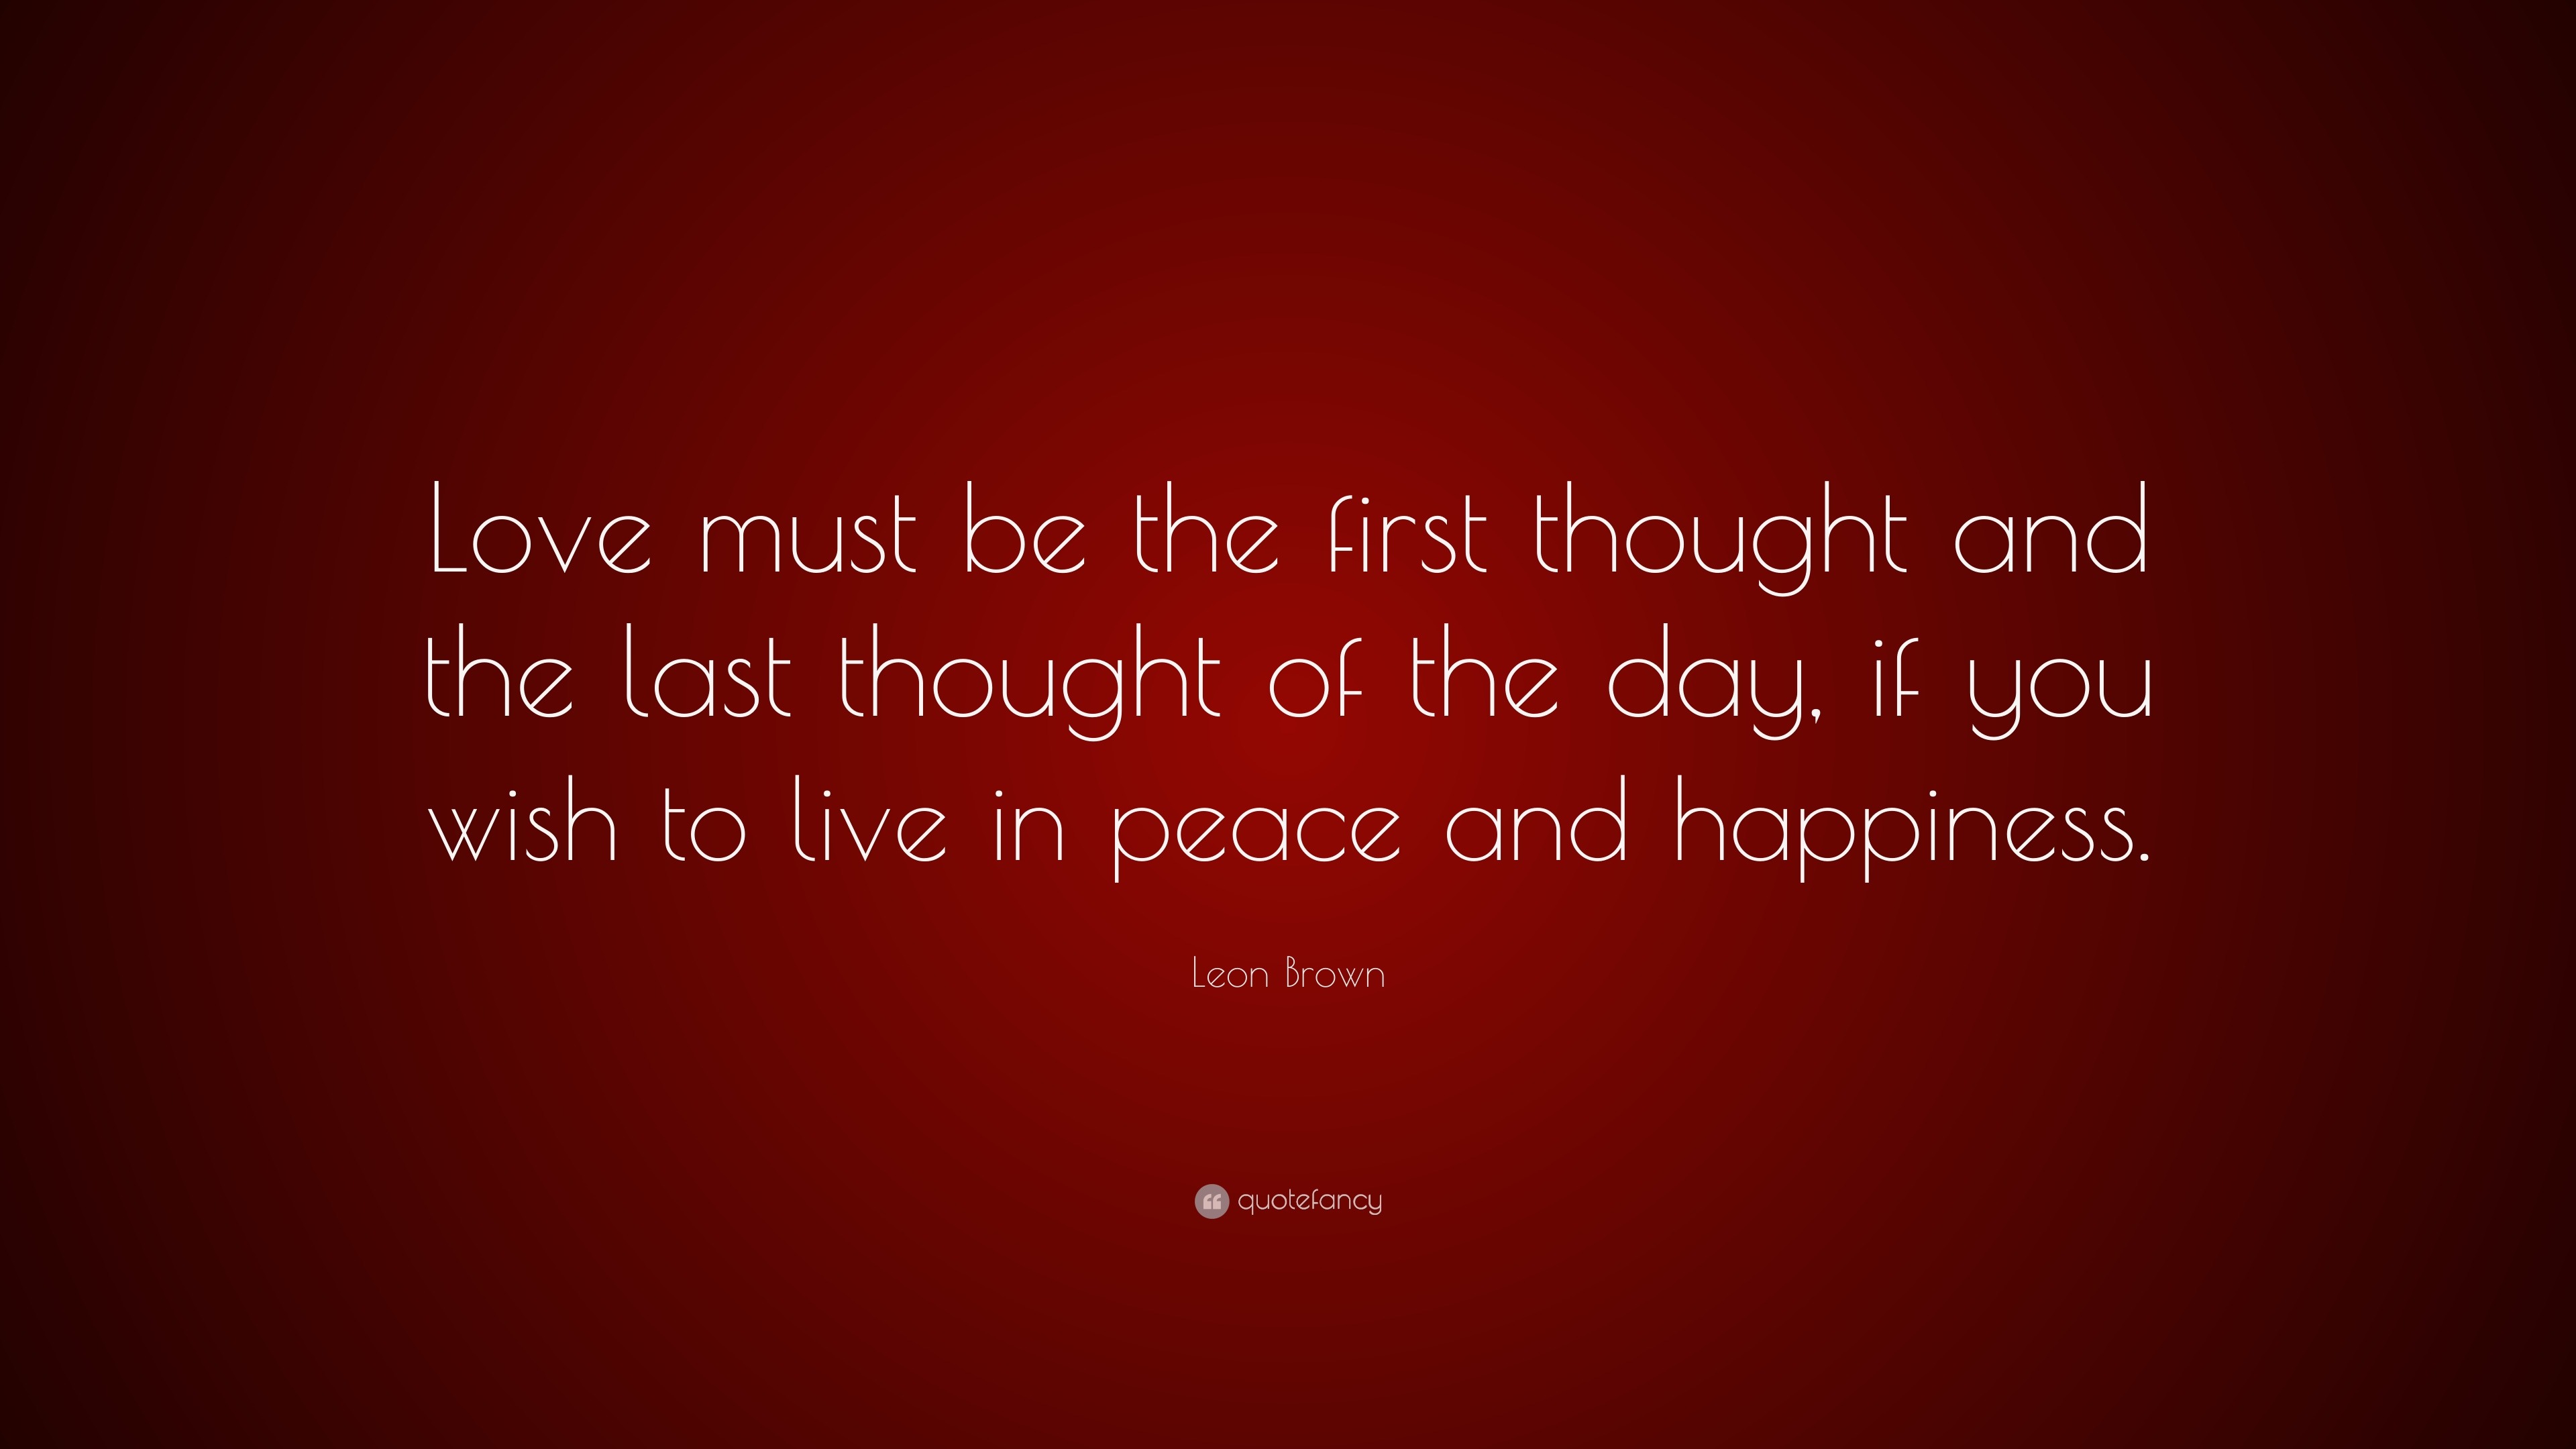 Leon Brown Quote “Love must be the first thought and the last thought of